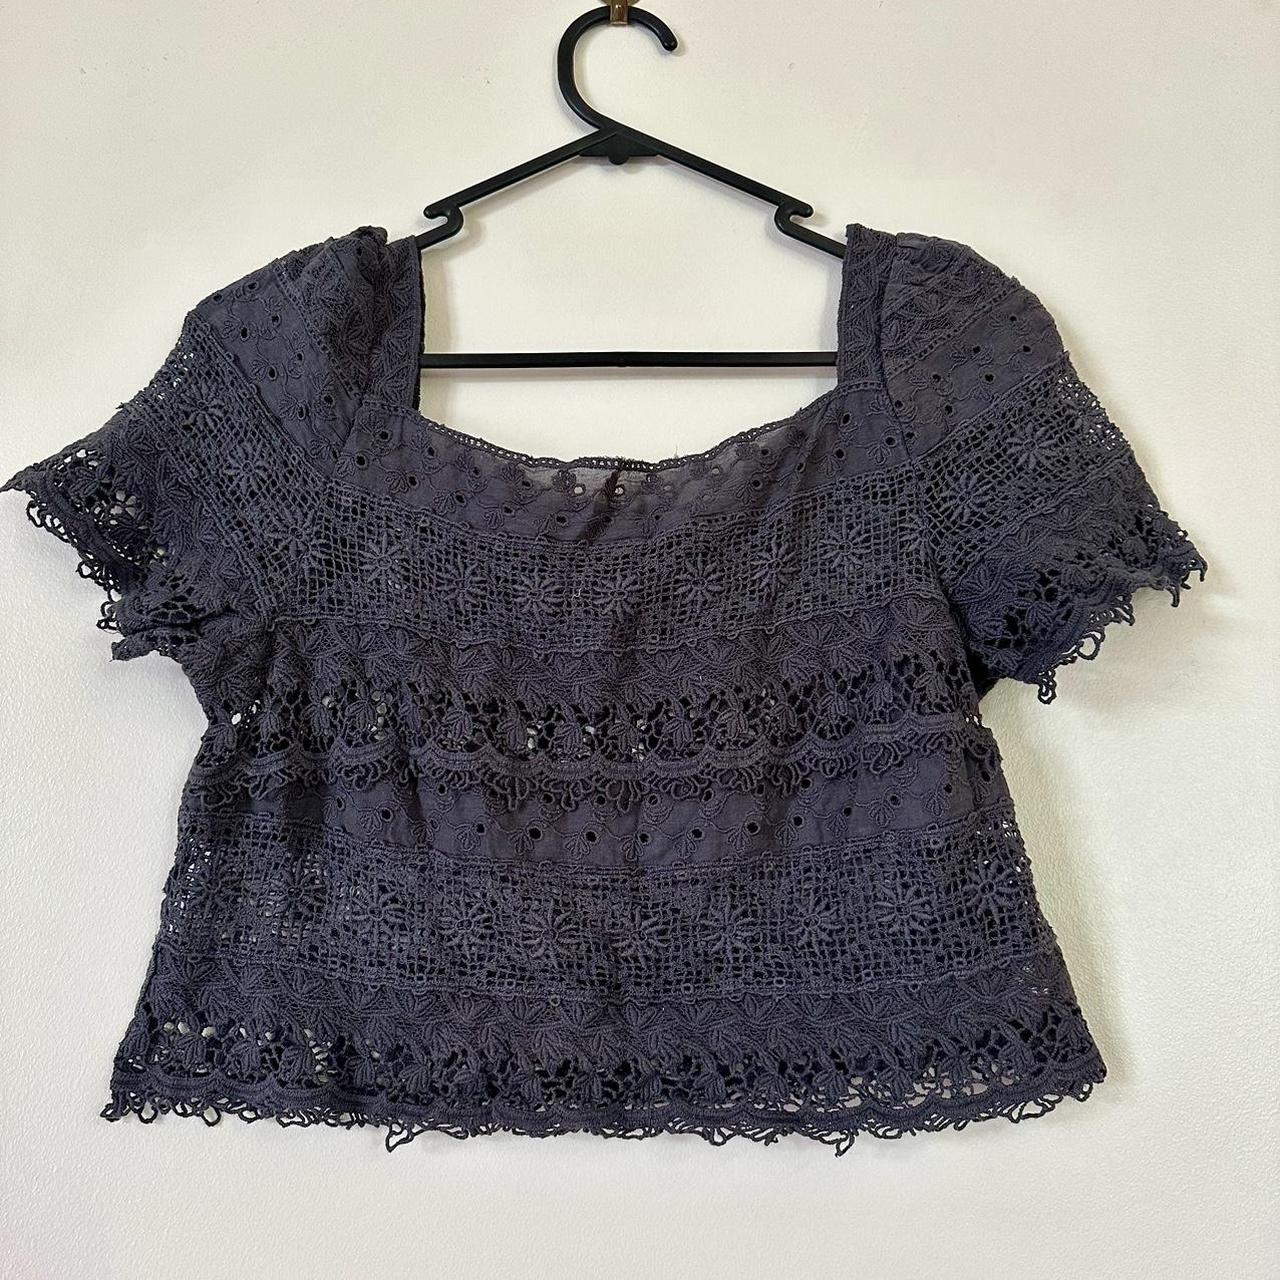 Free People Crop Top - Different kind of Lace... - Depop